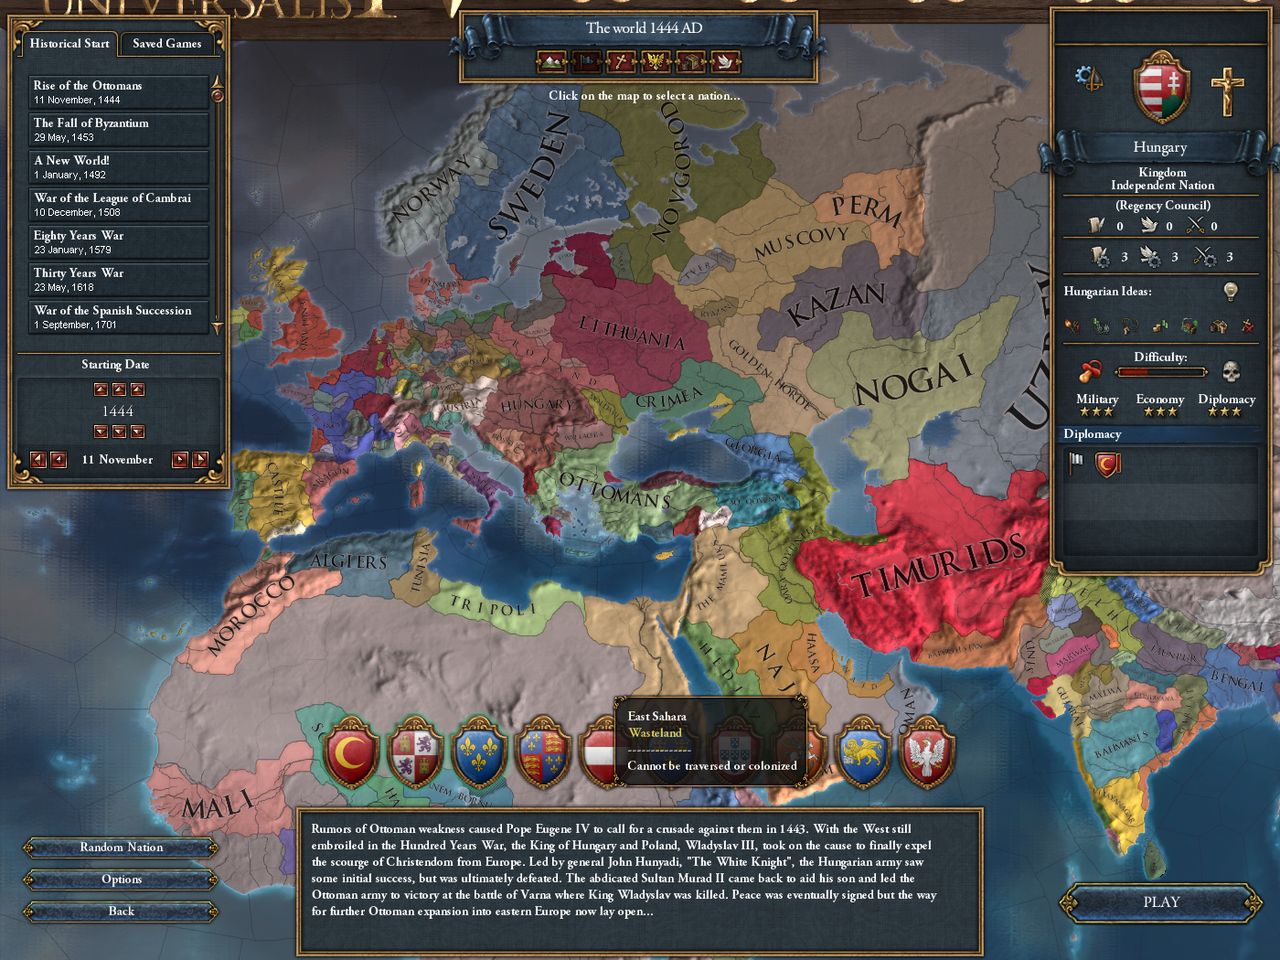 Europa Universalis IV : Wealth of Nations